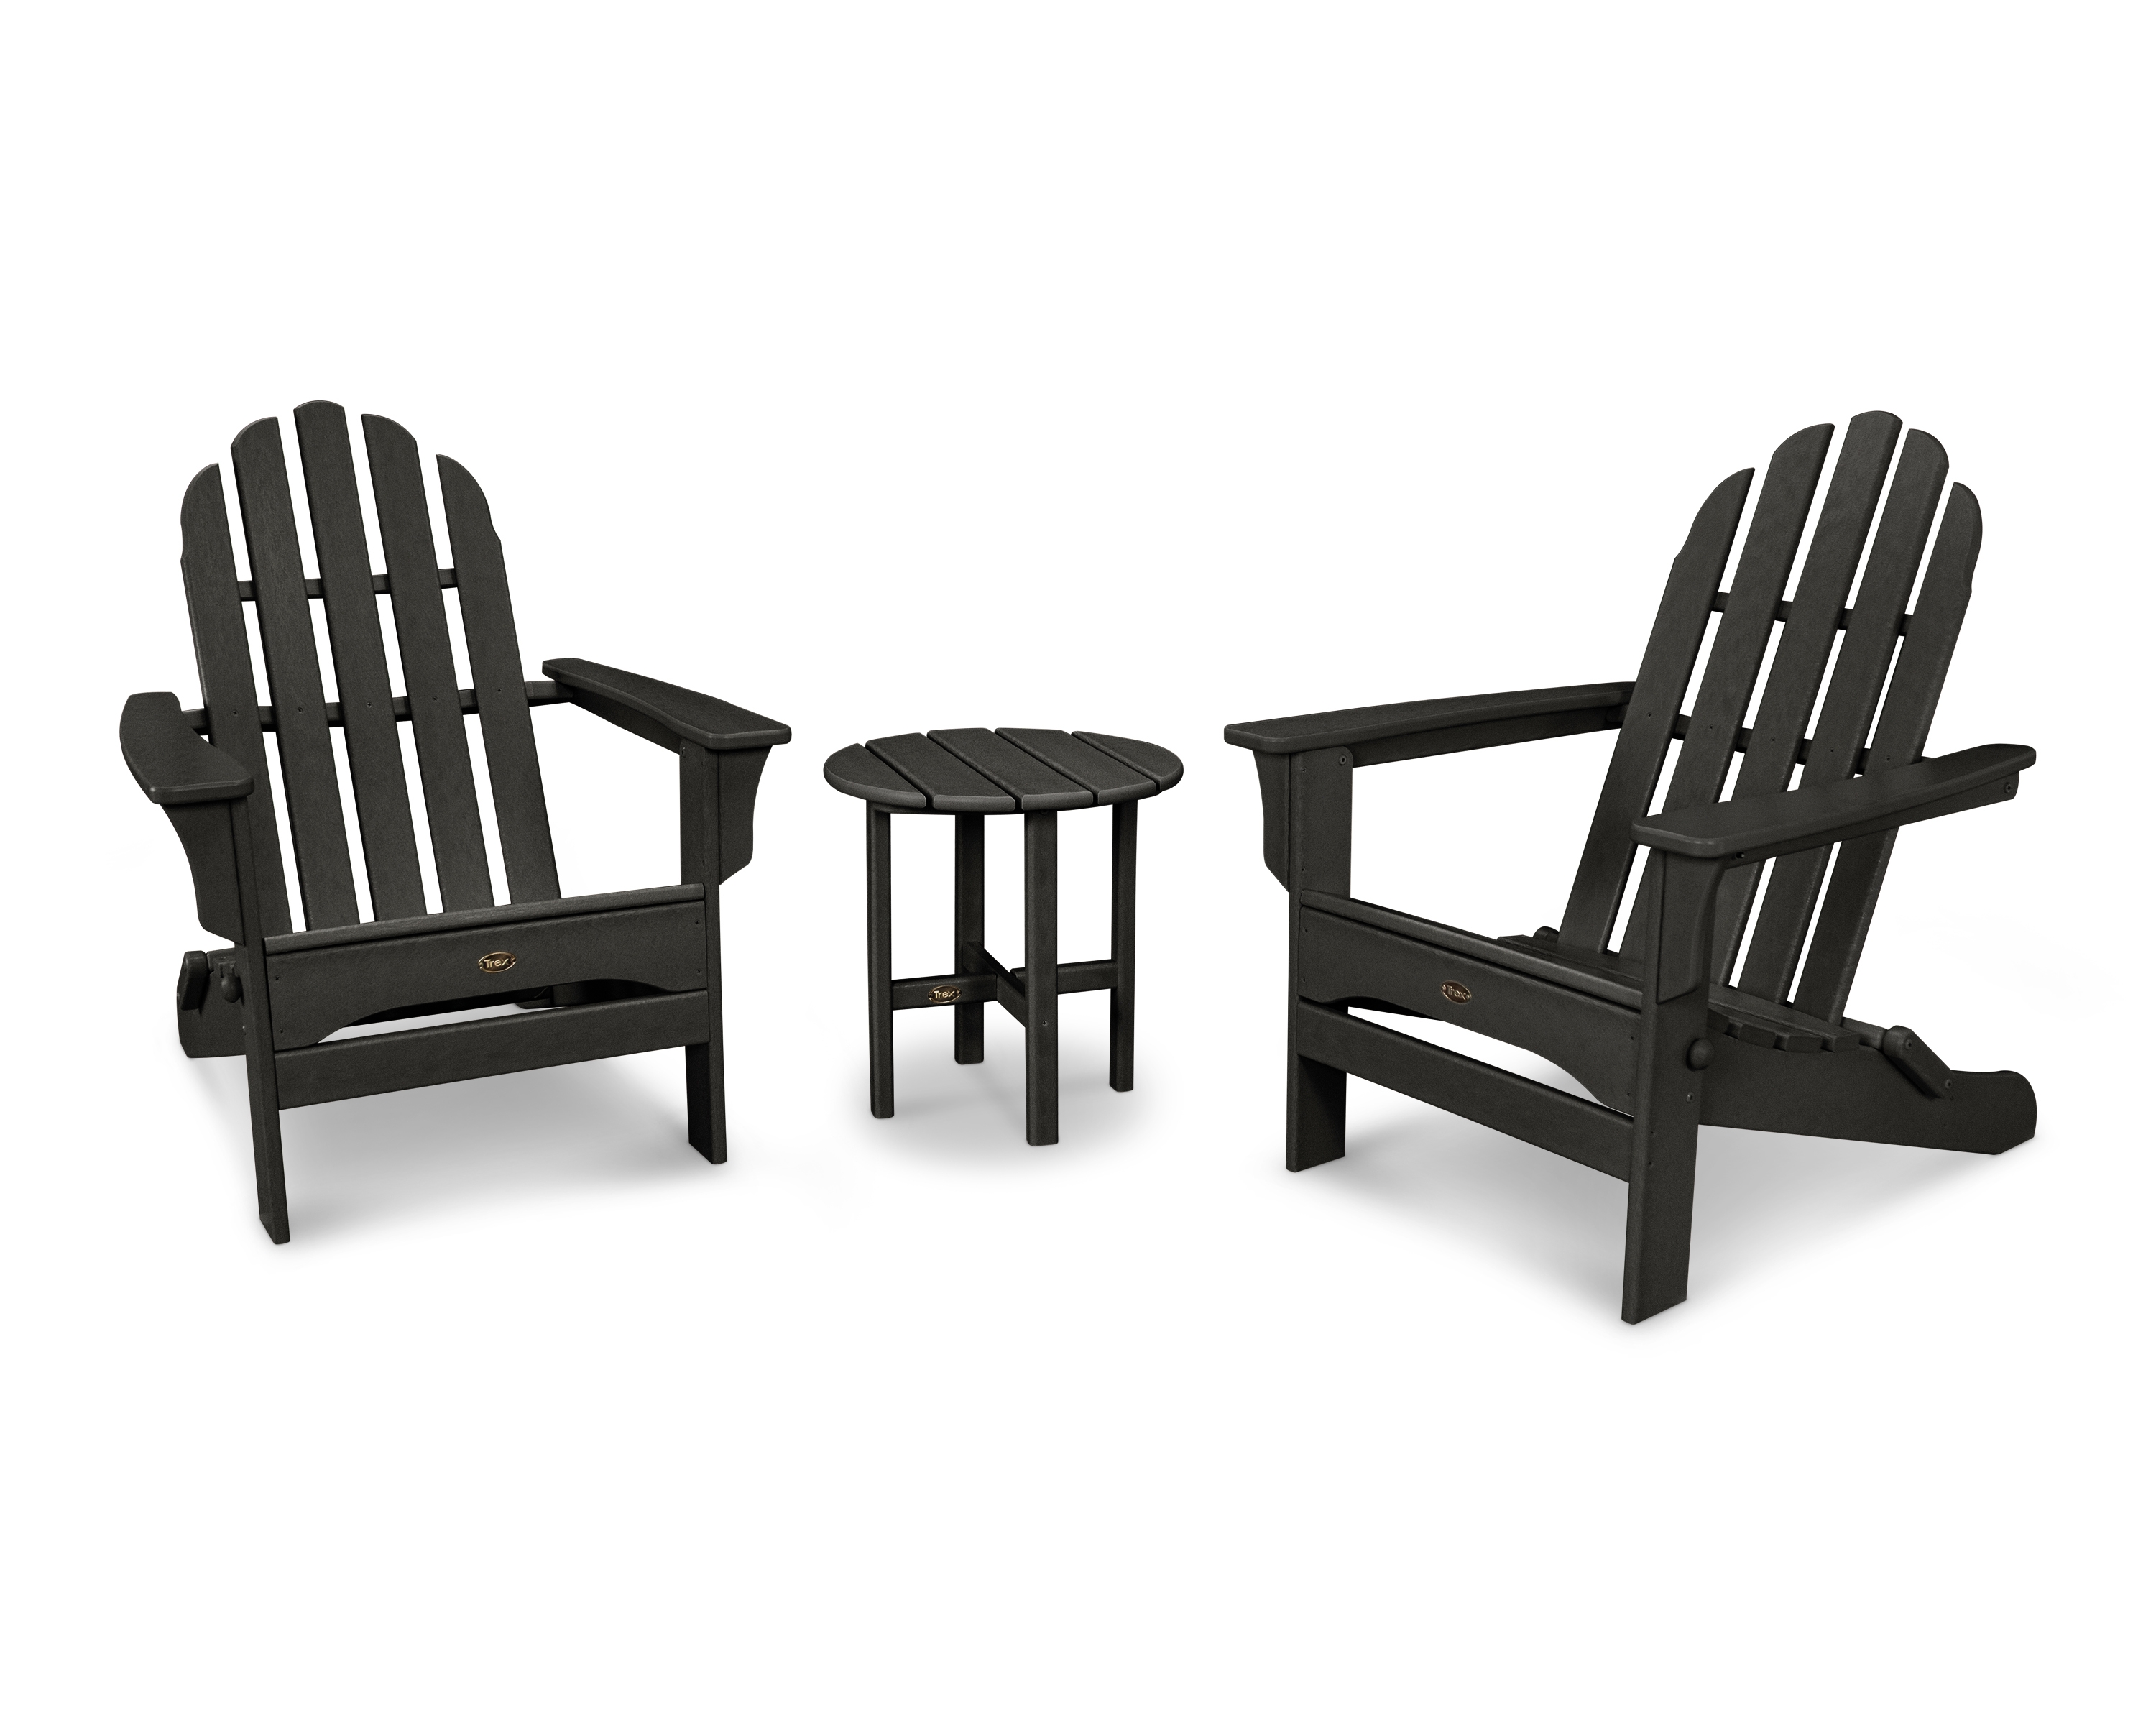 Trex® Outdoor Furniture™ Cape Cod Folding Adirondack Chairs with Side Table Ensemble